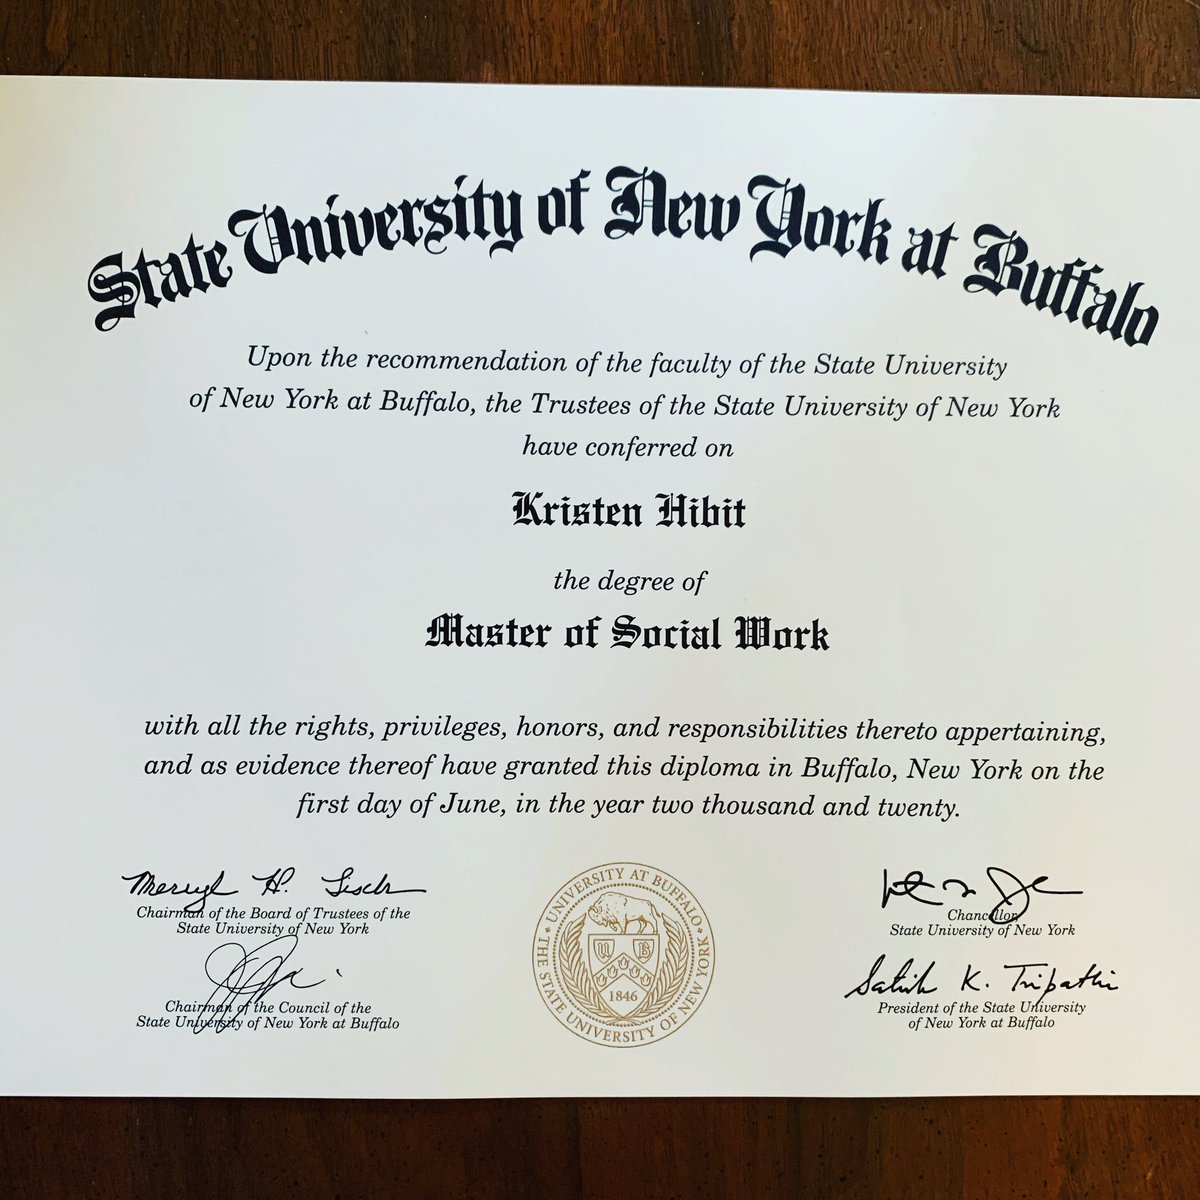 It’s officially official. Officially a Master of Social Work. Looking forward to master what is ahead! #macrosw #policy #policyanalysis #socialjustice #socialwork #polticialsocialwork